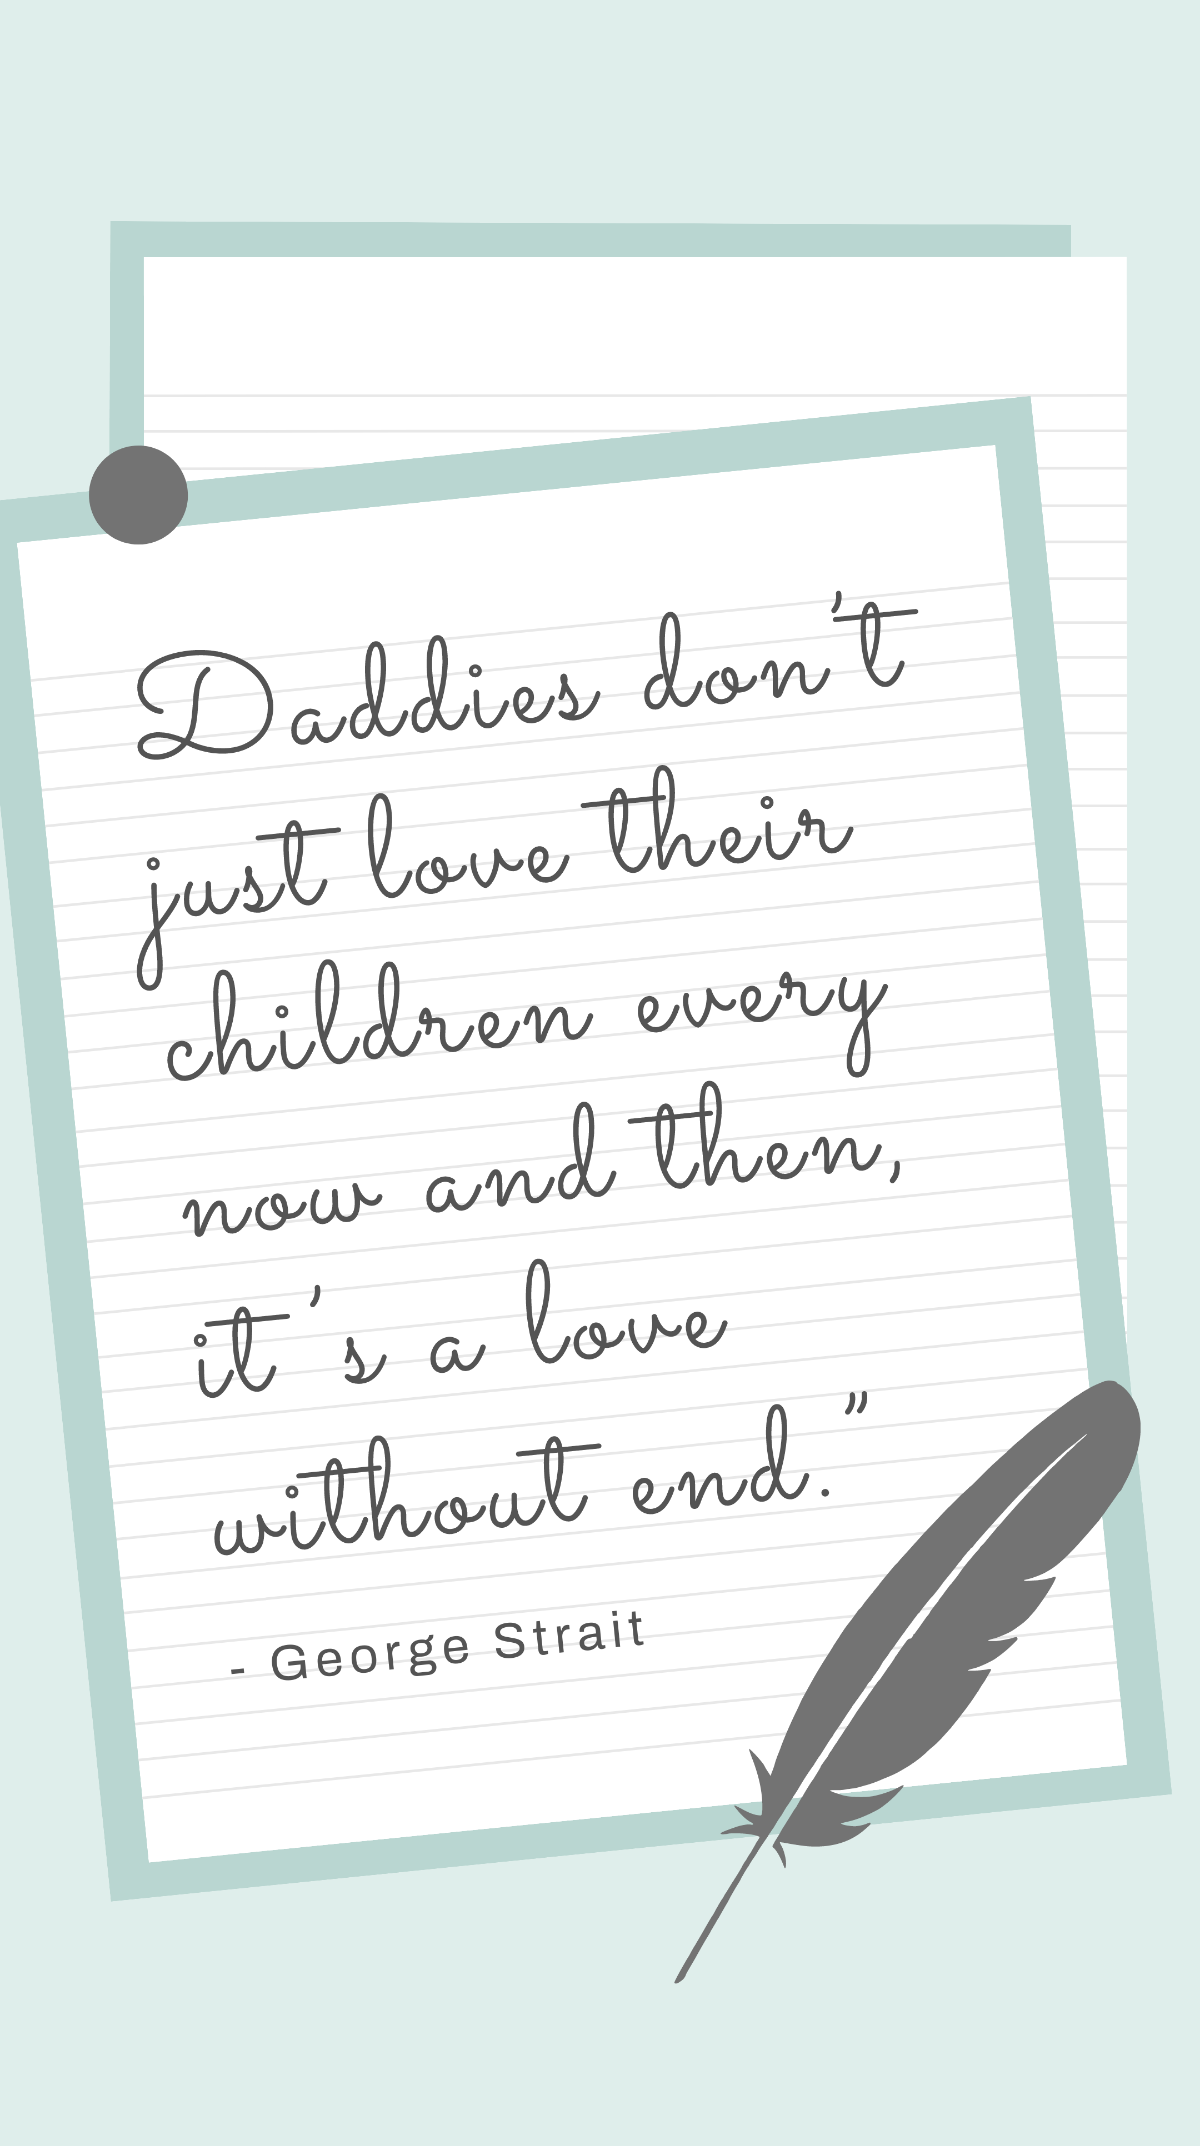 George Strait - “Daddies don’t just love their children every now and then, it’s a love without end.” Template